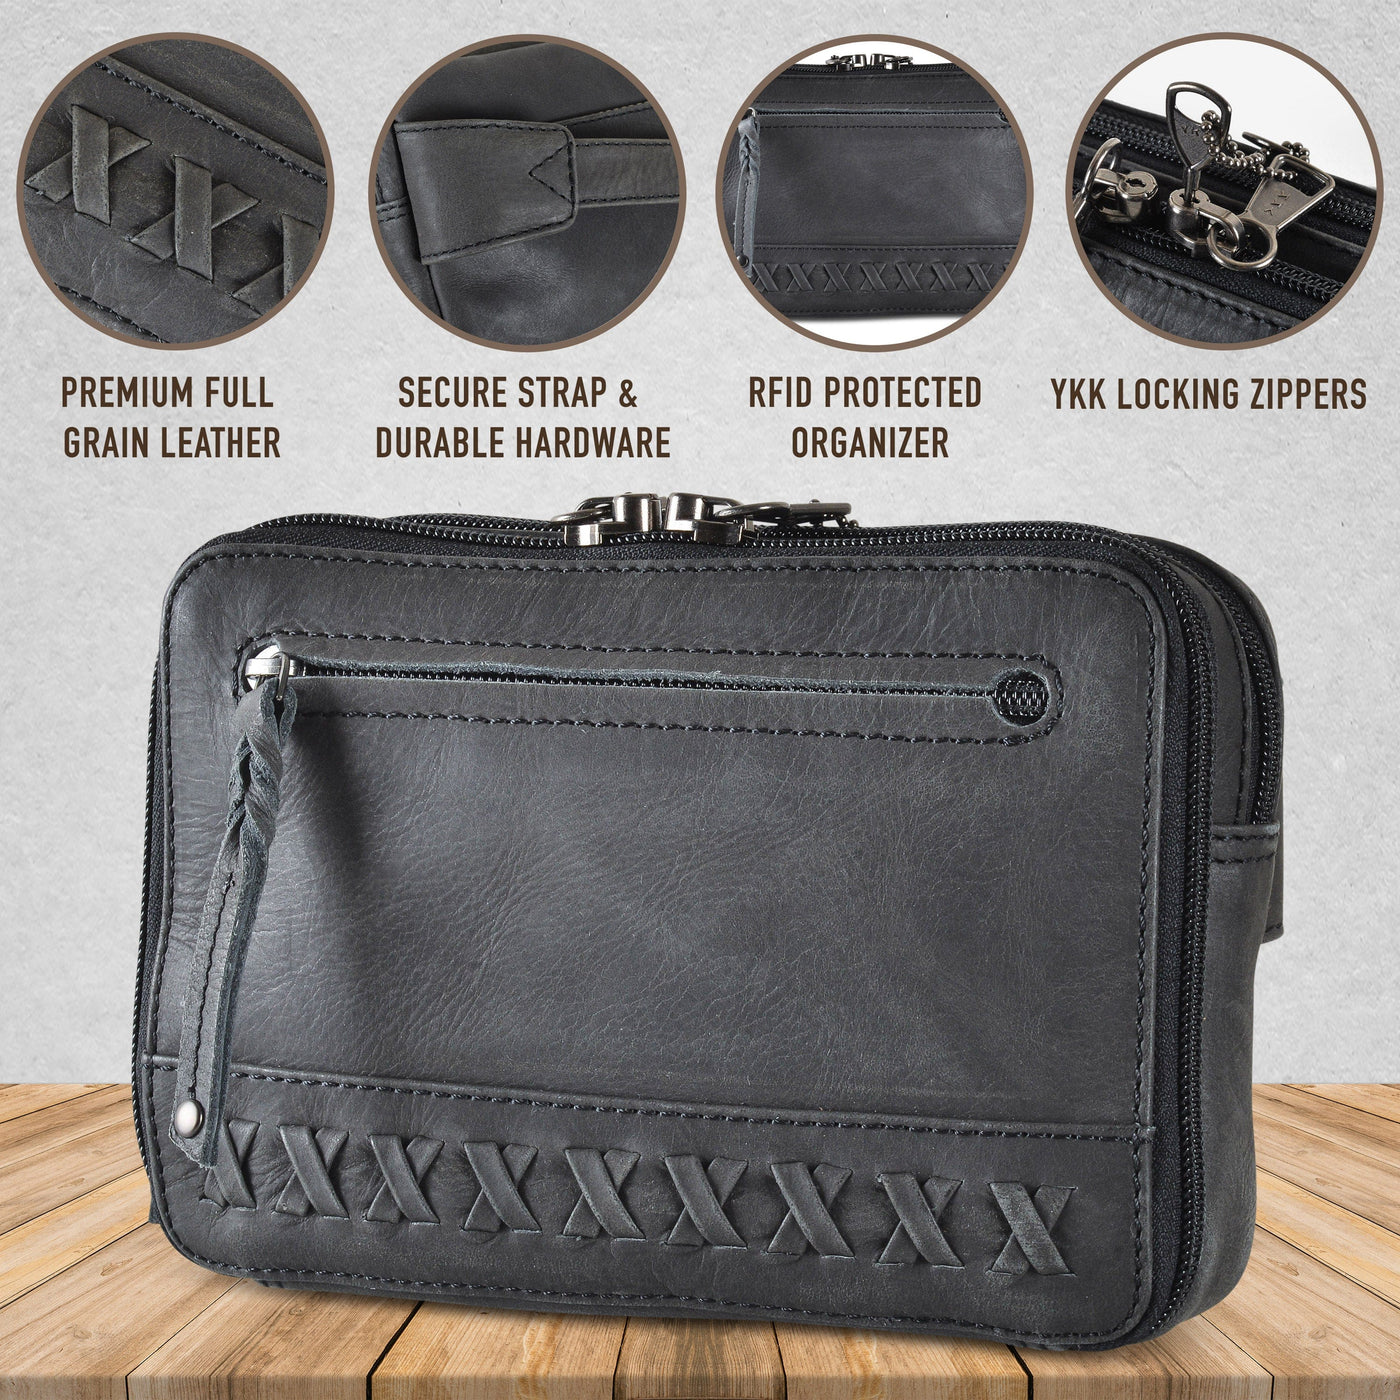 Concealed Carry Kailey Leather Purse Pack - Lady Conceal - Concealed Carry Purse - Lady ConcealConcealed Carry Kailey Leather Purse Pack -  Lady Conceal -  Concealed Carry Purse -  most popular crossbody bag -  crossbody handgun bag -  crossbody bags for everyday use -  Lady Conceal -  Unique Hide Purse -  Locking YKK Purse -  Fanny Pack for Gun and Pistol -  Easy CCW -  Fast Draw Bag -  Secure Gun Bag